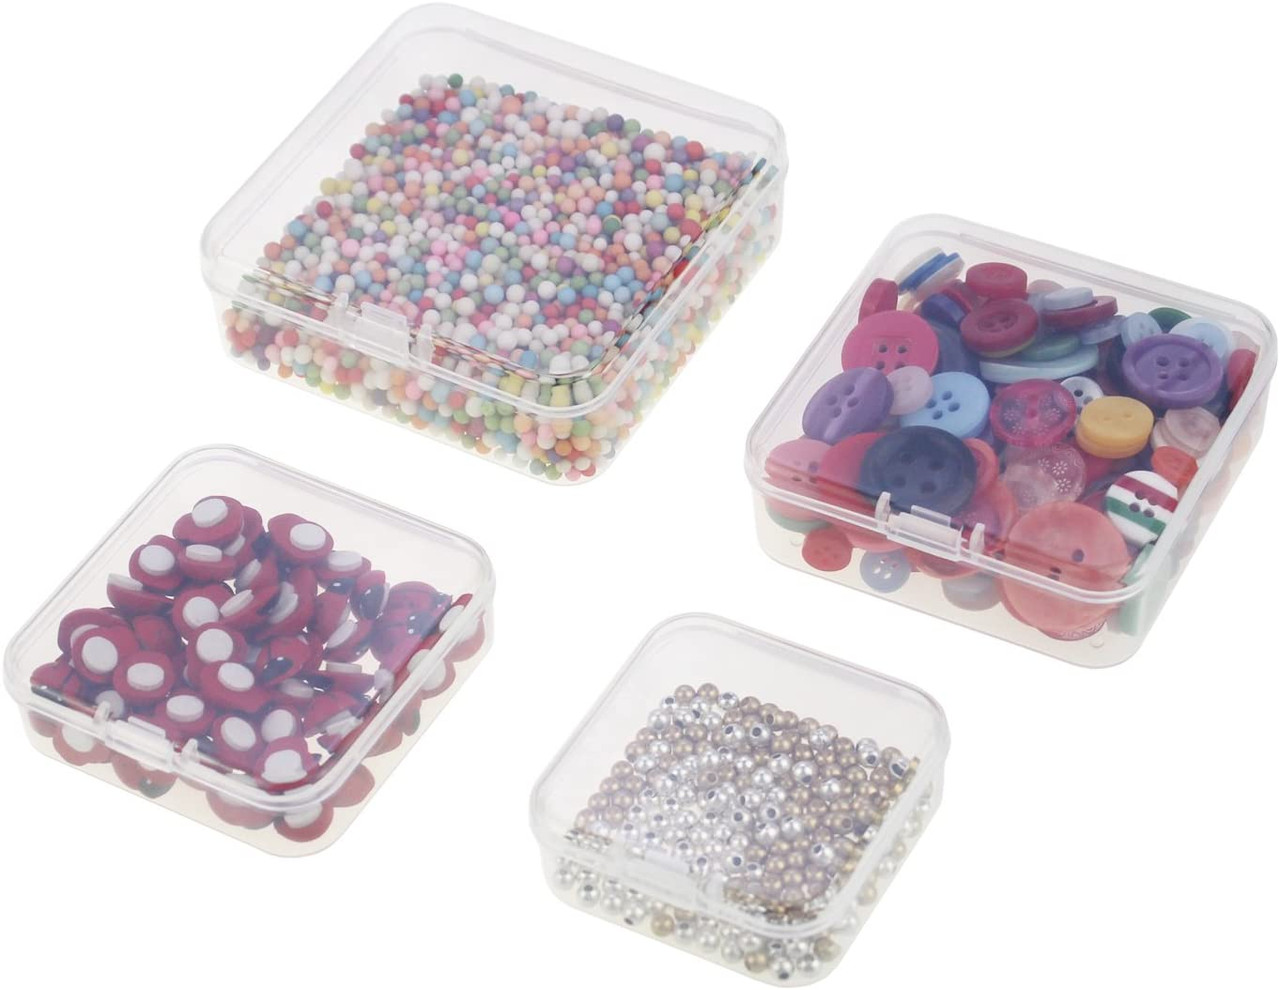 LJY 32 Pieces Mixed Sizes Square Empty Mini Clear Plastic Storage Containers  Box Case with Lids for Small Items and Other Craft Projects - LJY  Technology Inc Official Website